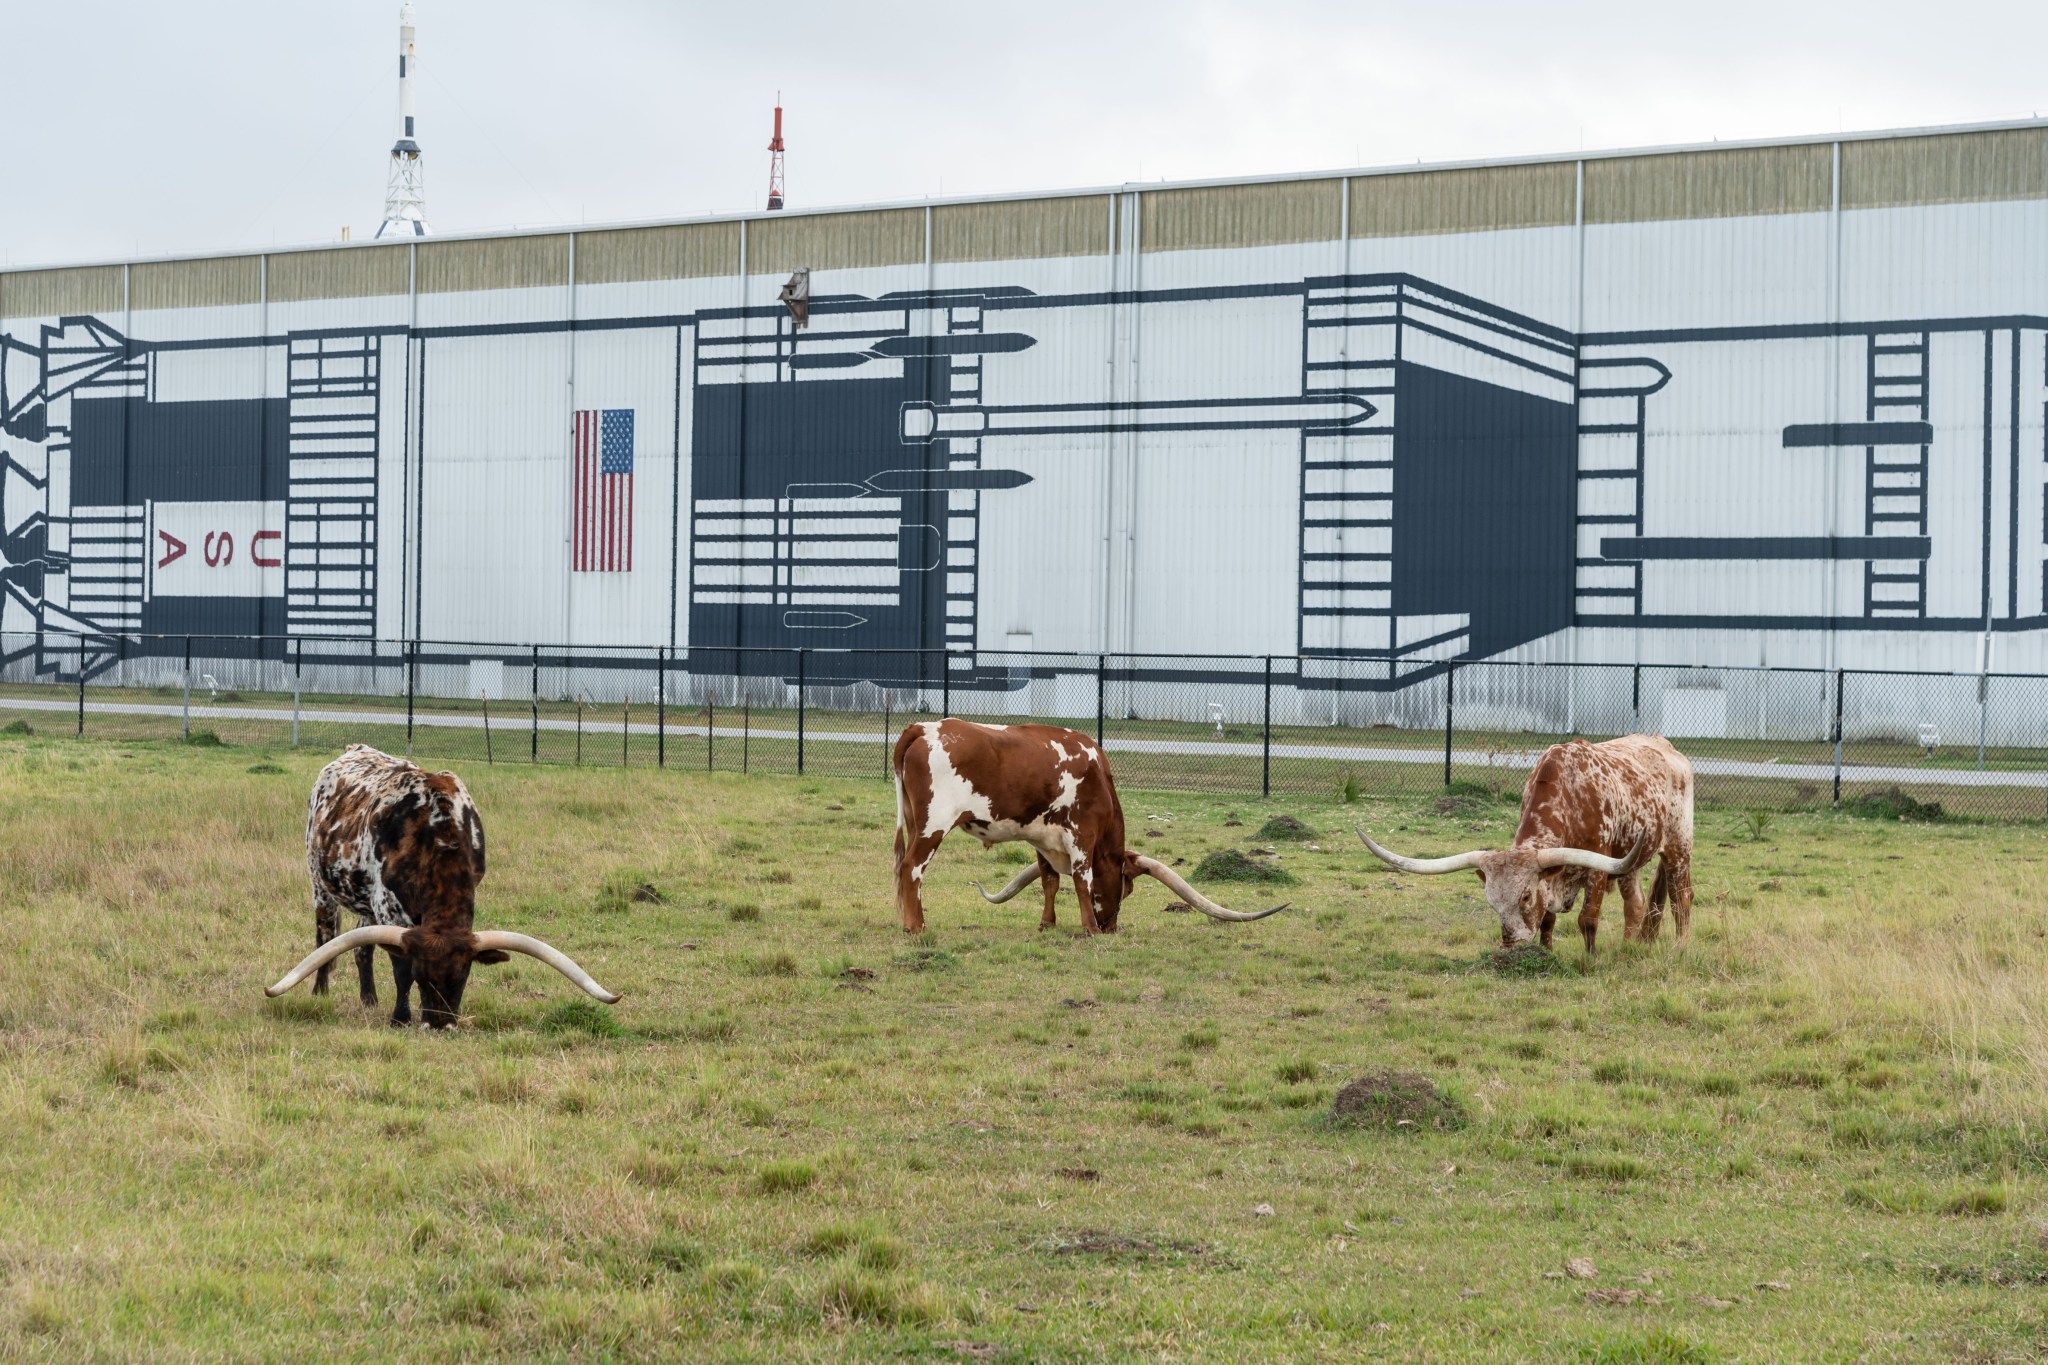 View of the George W.S. Abbey Rocket Park at NASA’s Johnson Space Center in Houston. Longhorn cattle are seen grazing beside the building.